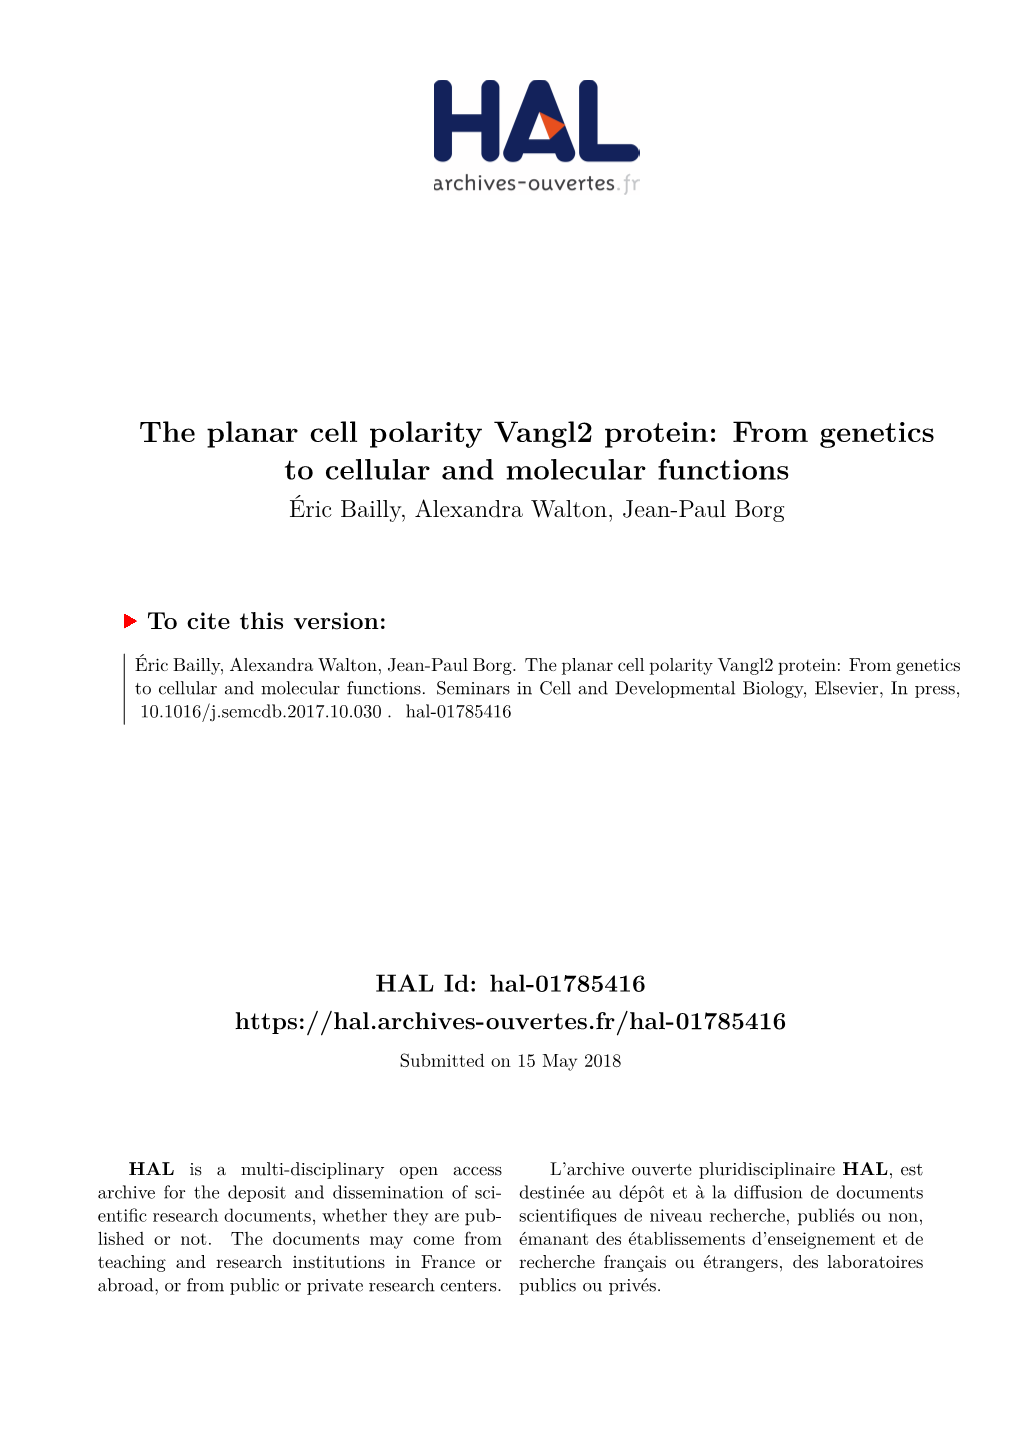 The Planar Cell Polarity Vangl2 Protein: from Genetics to Cellular and Molecular Functions Éric Bailly, Alexandra Walton, Jean-Paul Borg